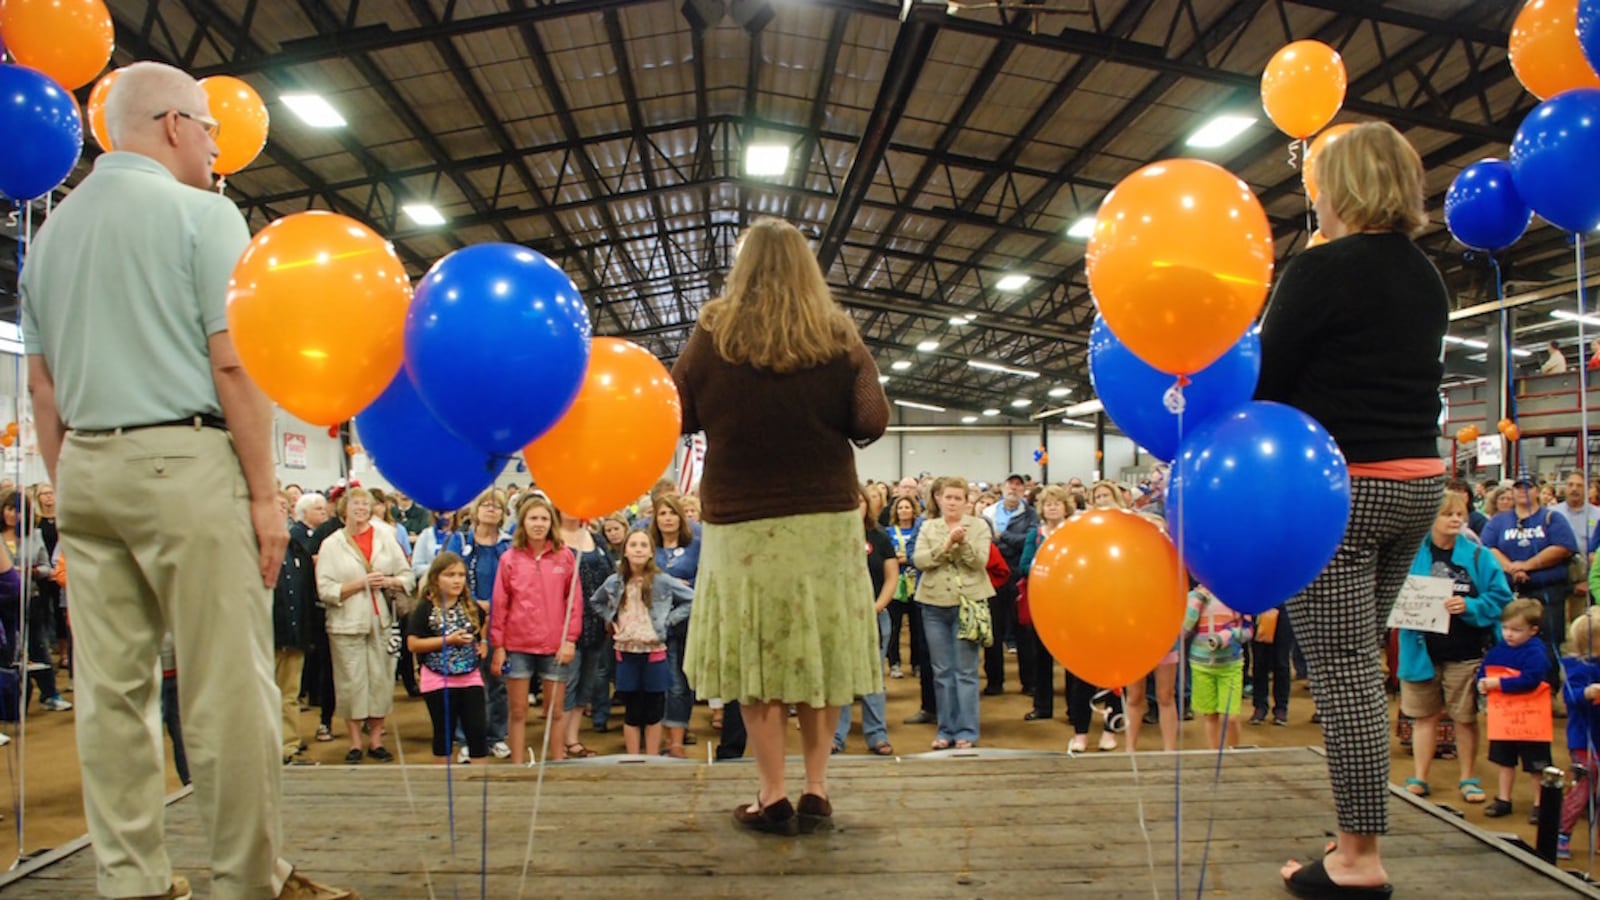 Organizers of an effort to recall three members of the Jefferson County school board addressed about 2,000 residents at a kick off event July 8.